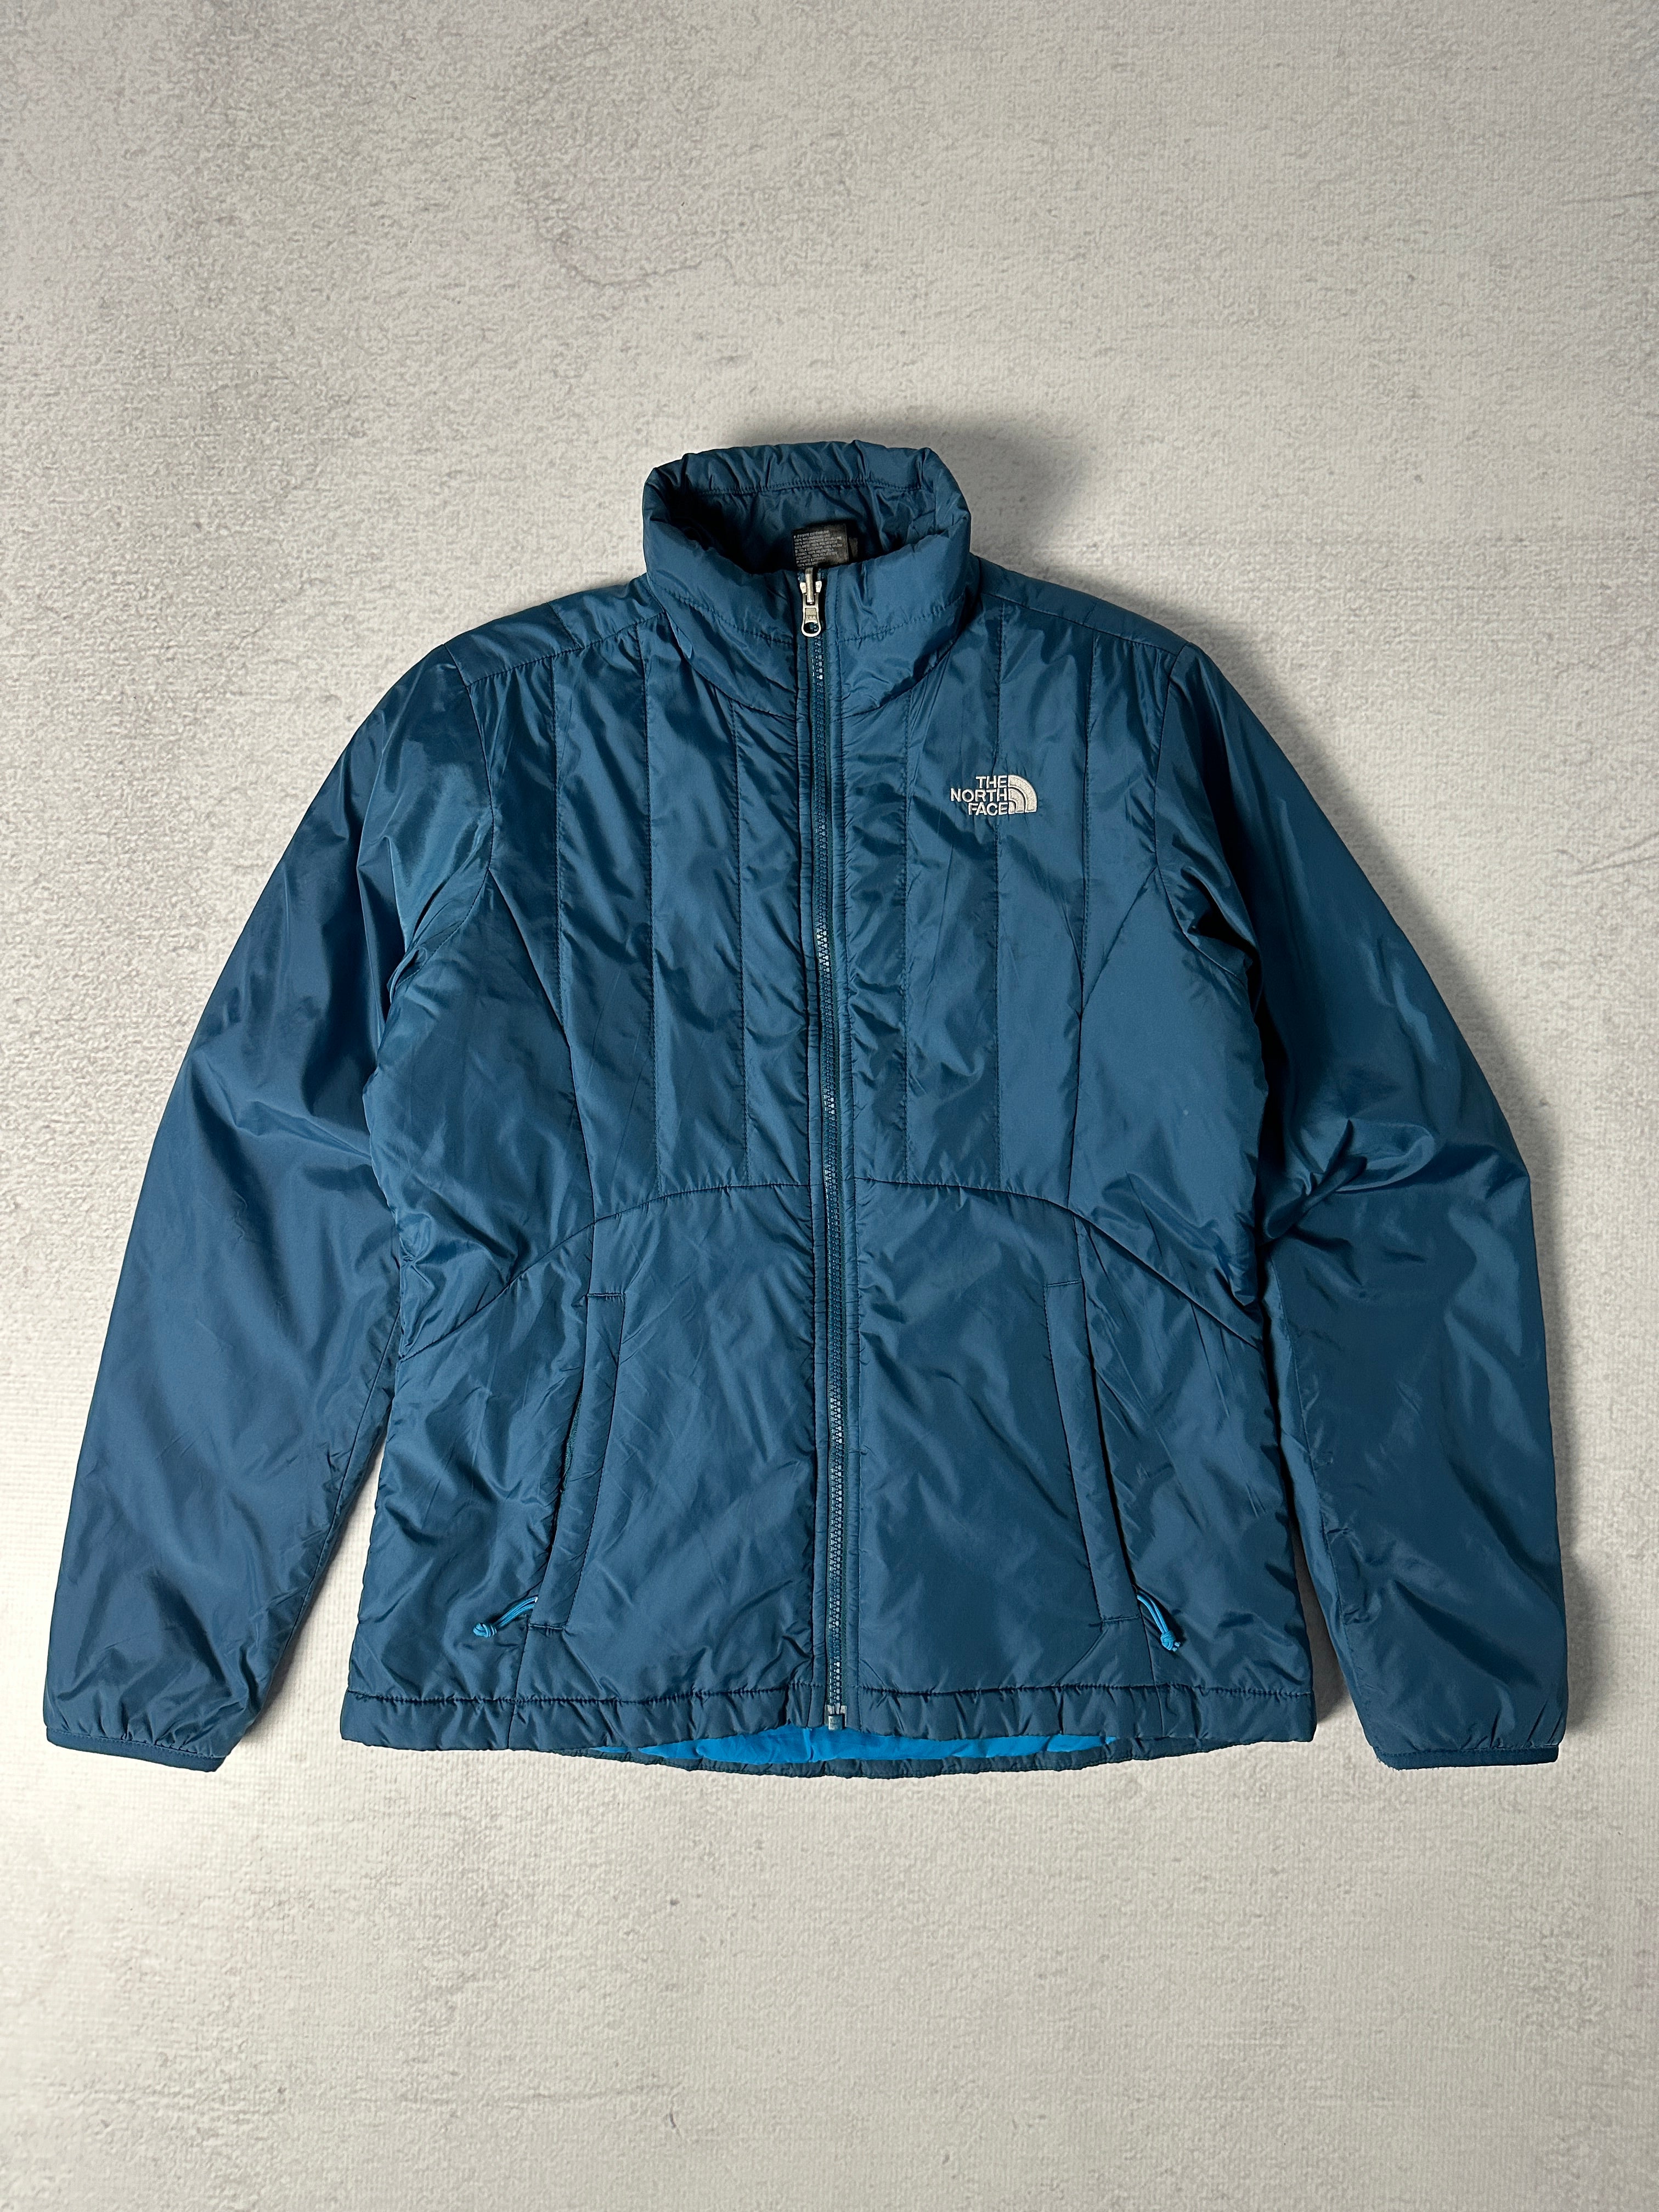 Vintage The North Face Insulated Jacket - Women's Medium